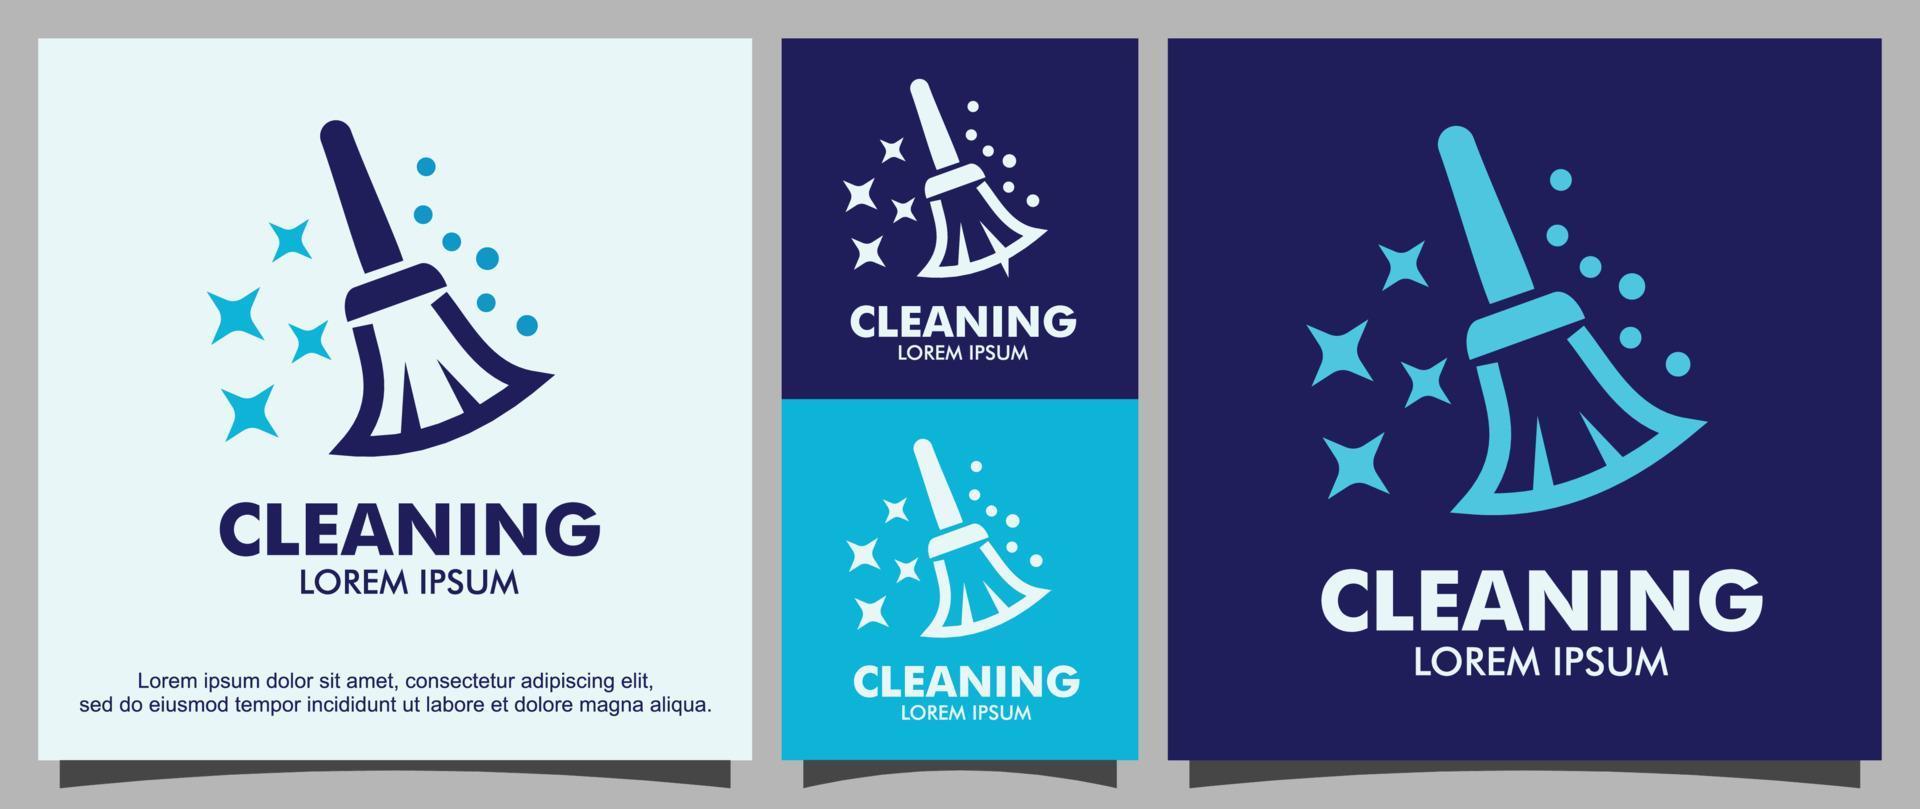 Cleaning services logo design template vector